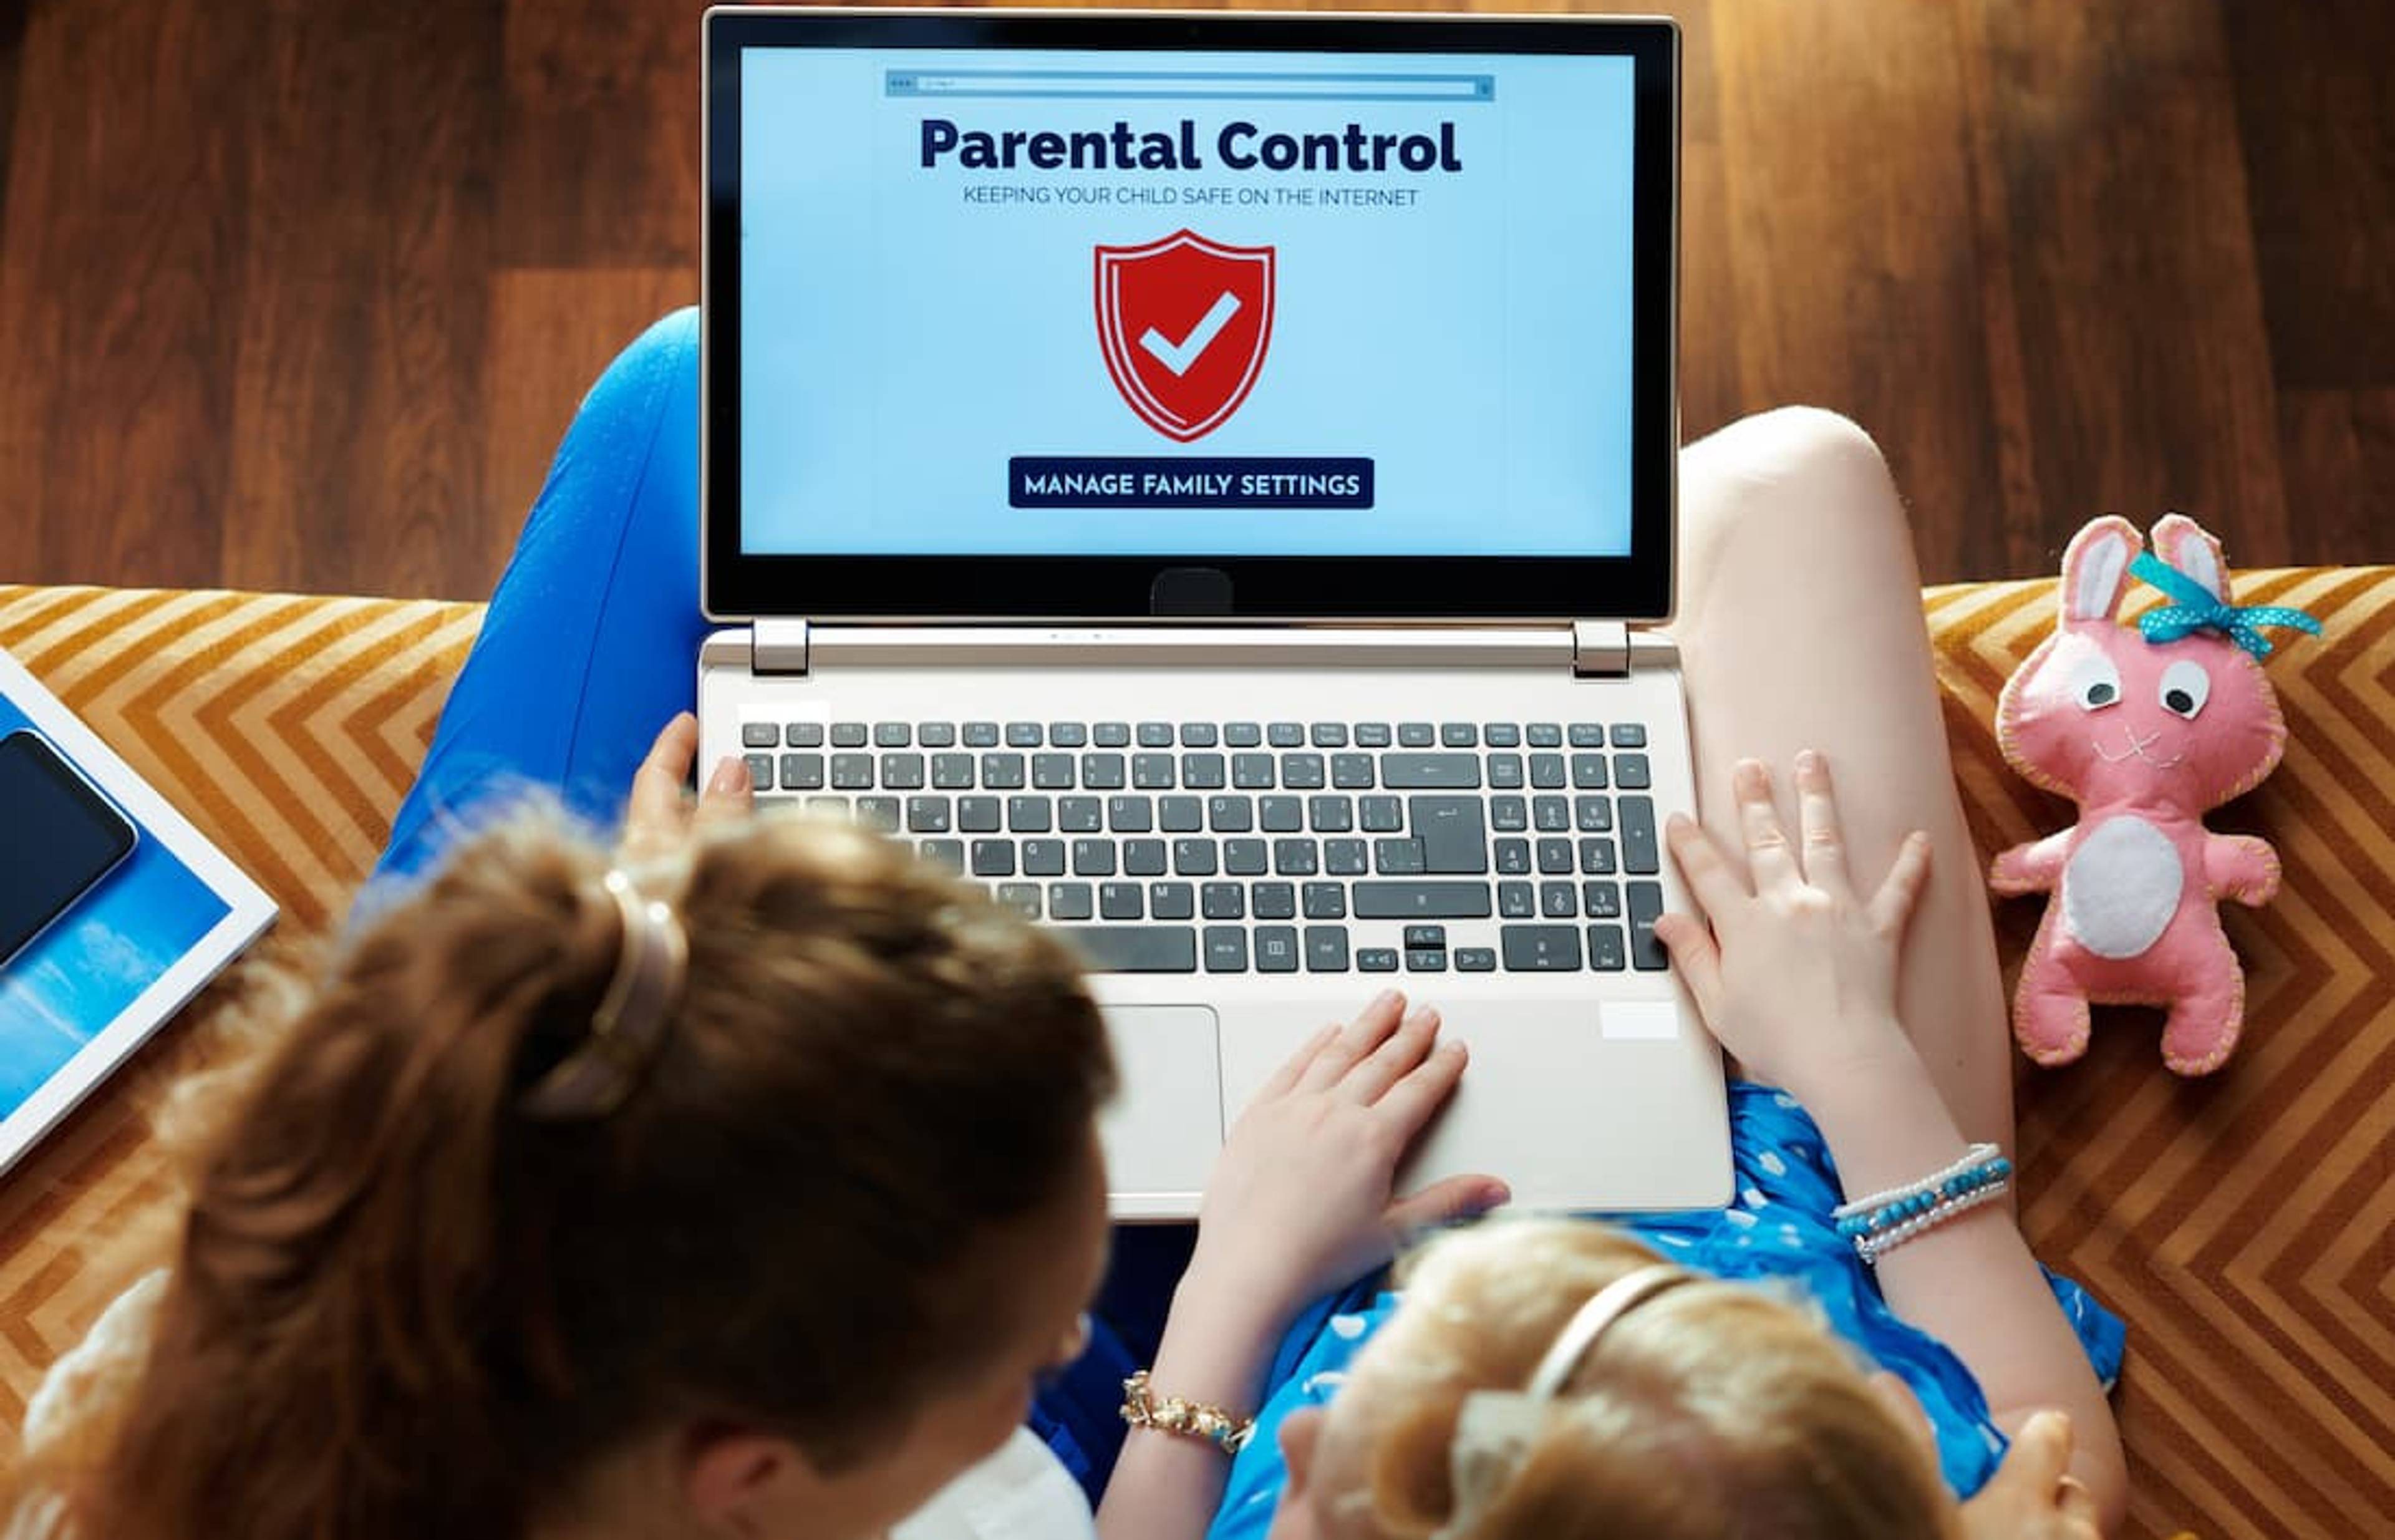 Researcher of the Month: Dr Mariya Stoilova Discusses the Pros and Cons of Parental Controls